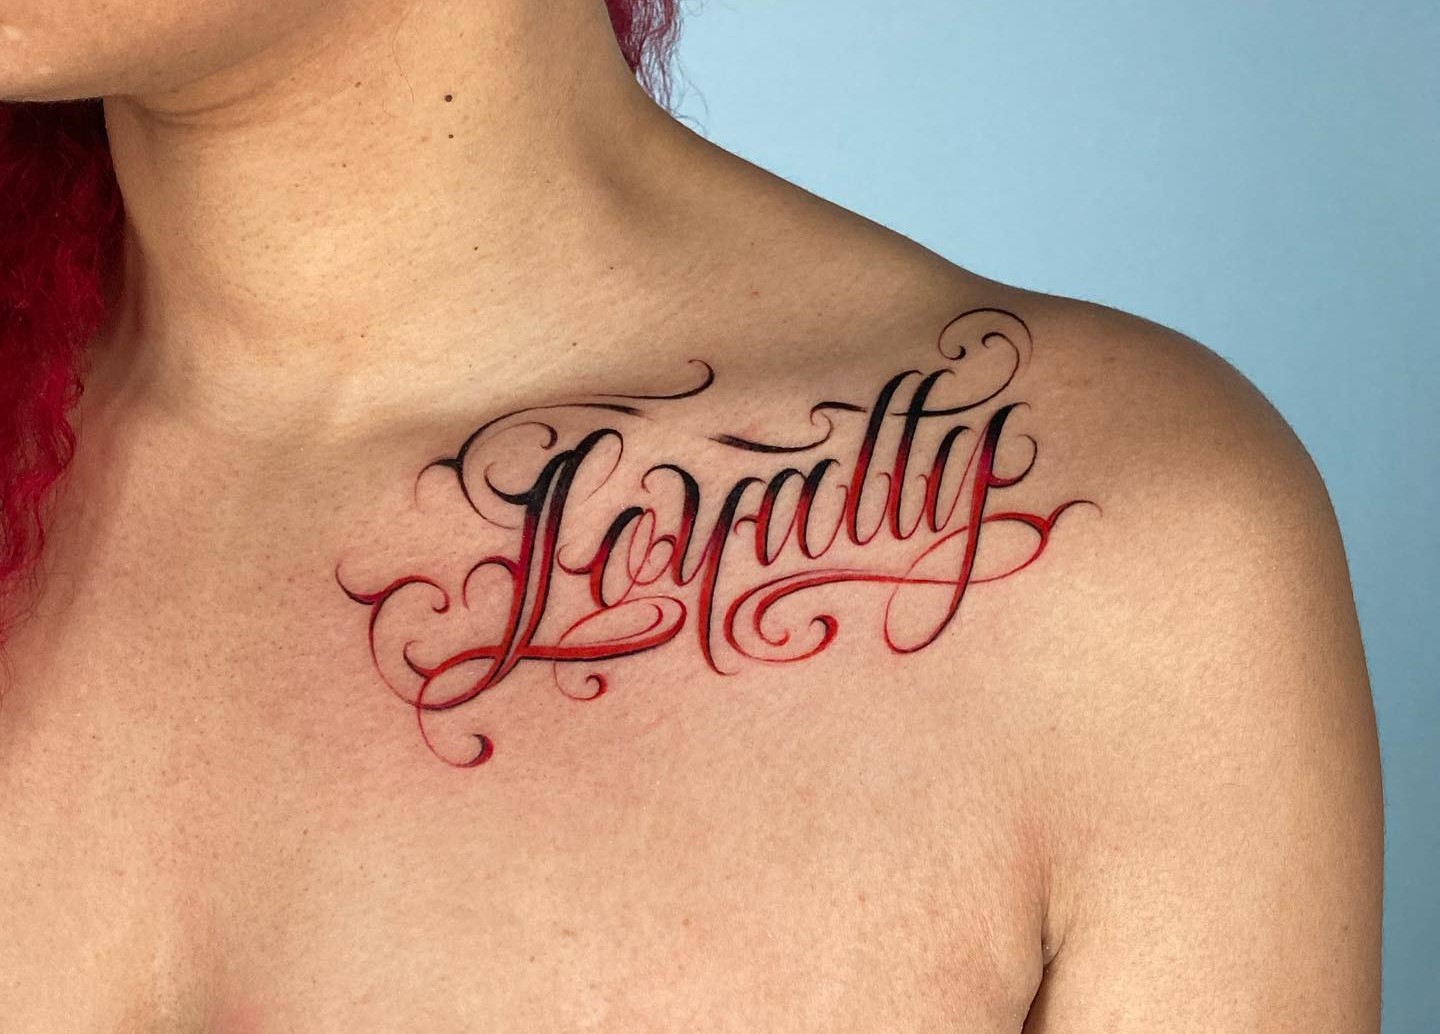 27 Best Cursive Tattoo Fonts for Stylish Lettering